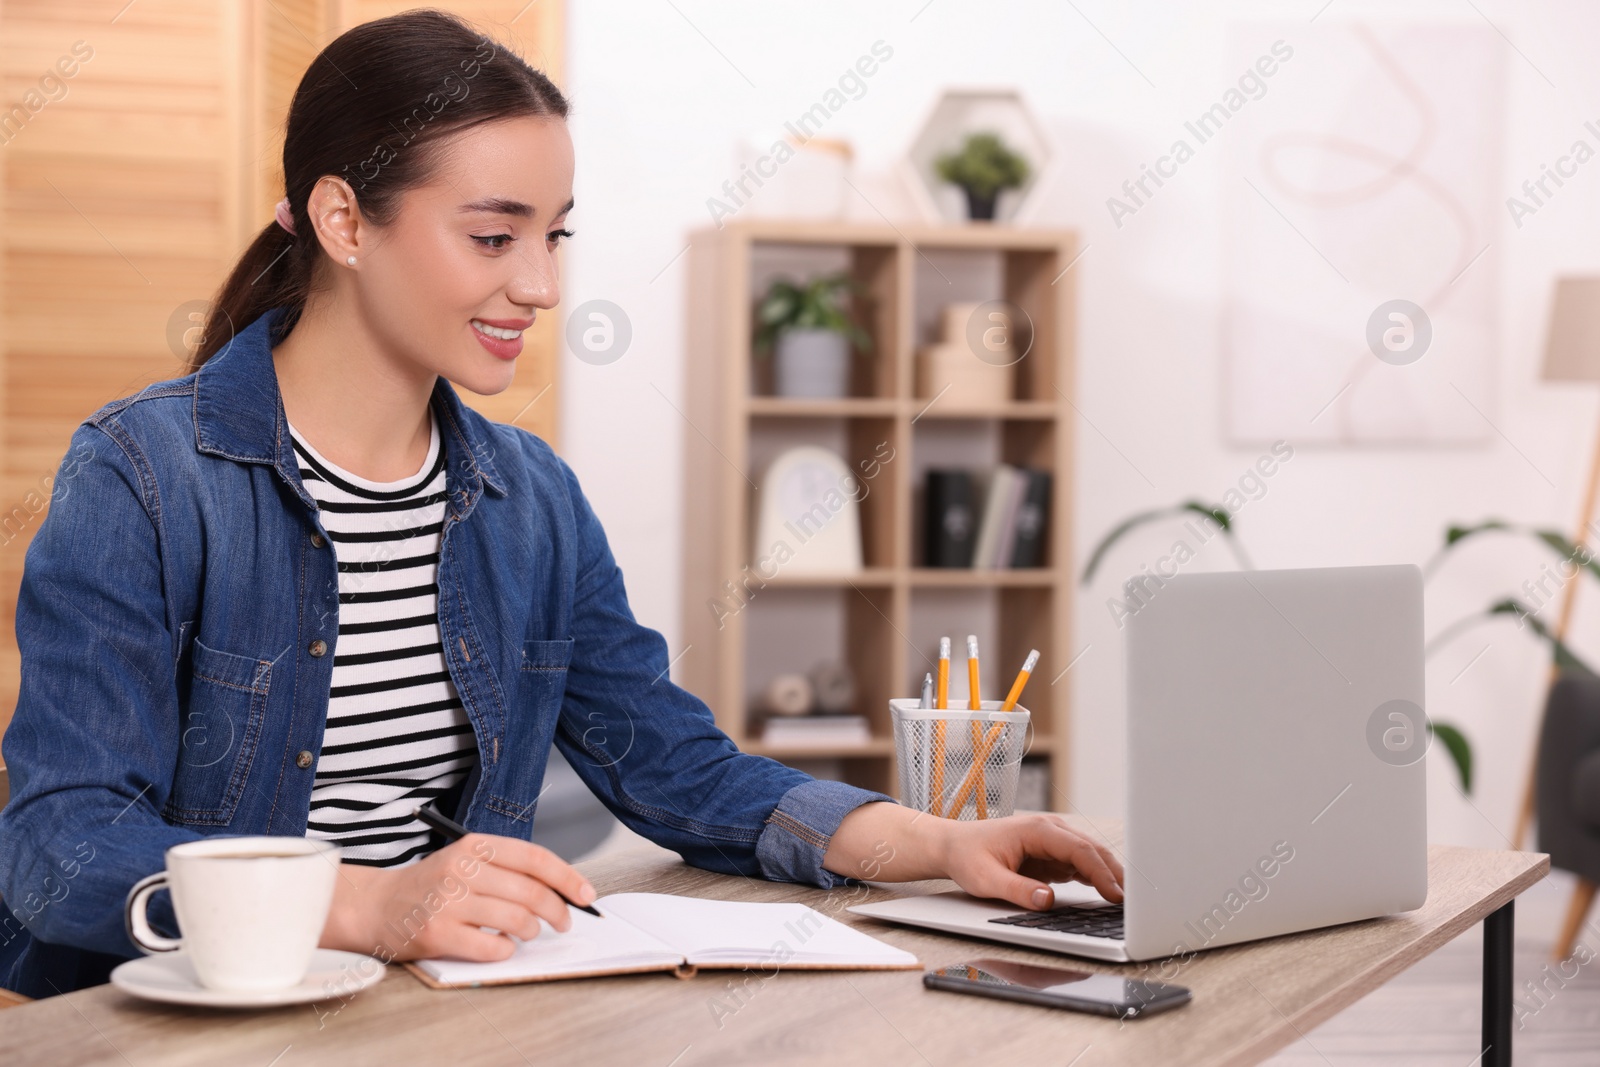 Photo of Young woman writing in notebook while working on laptop at wooden table indoors